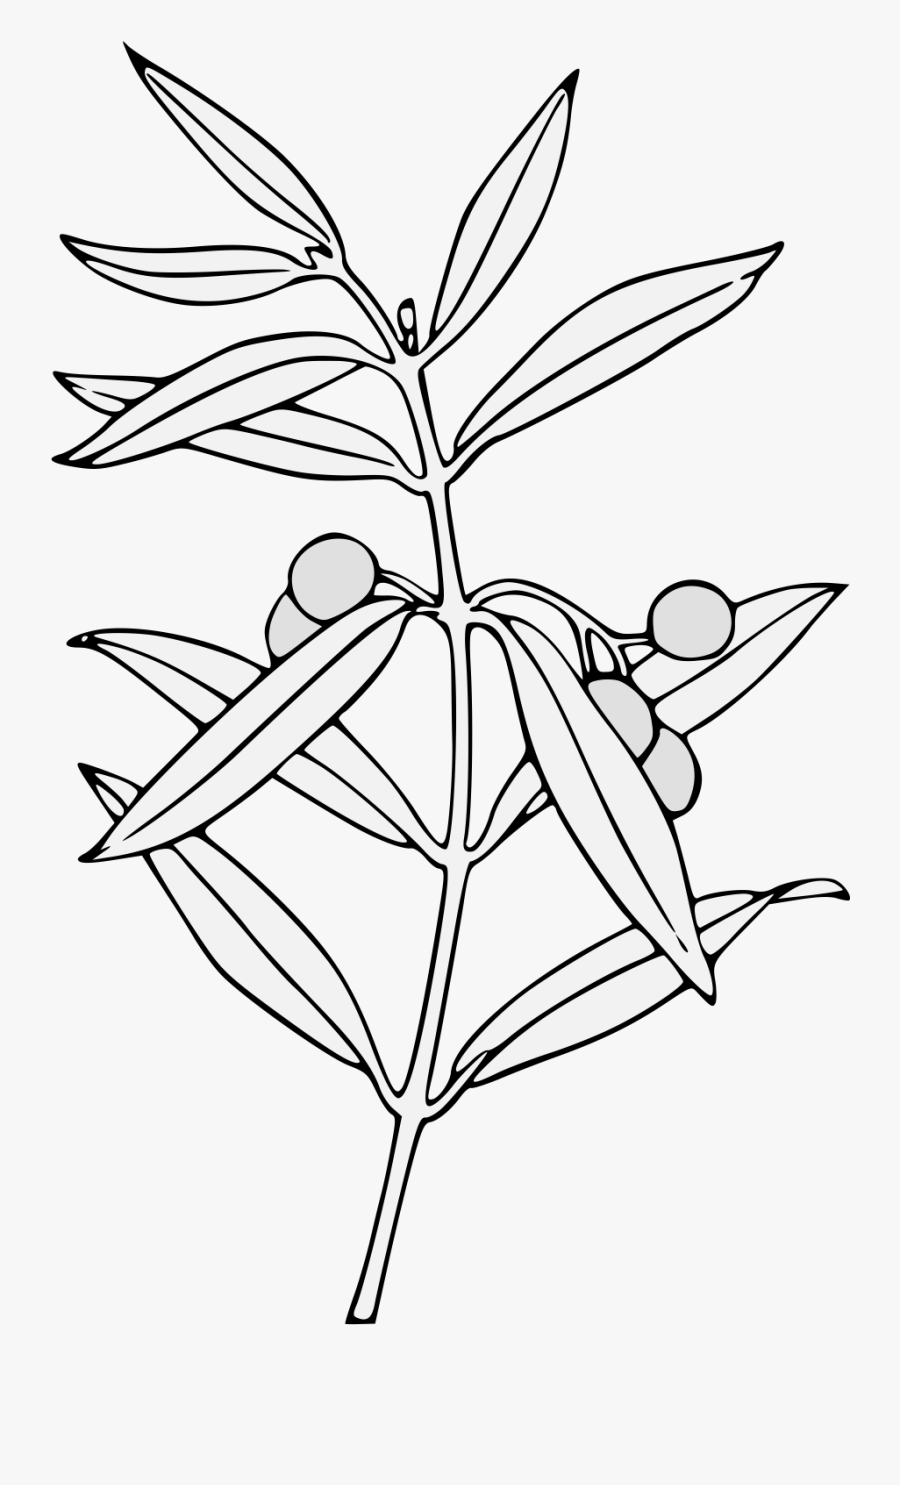 Olive Drawing Png, Transparent Clipart